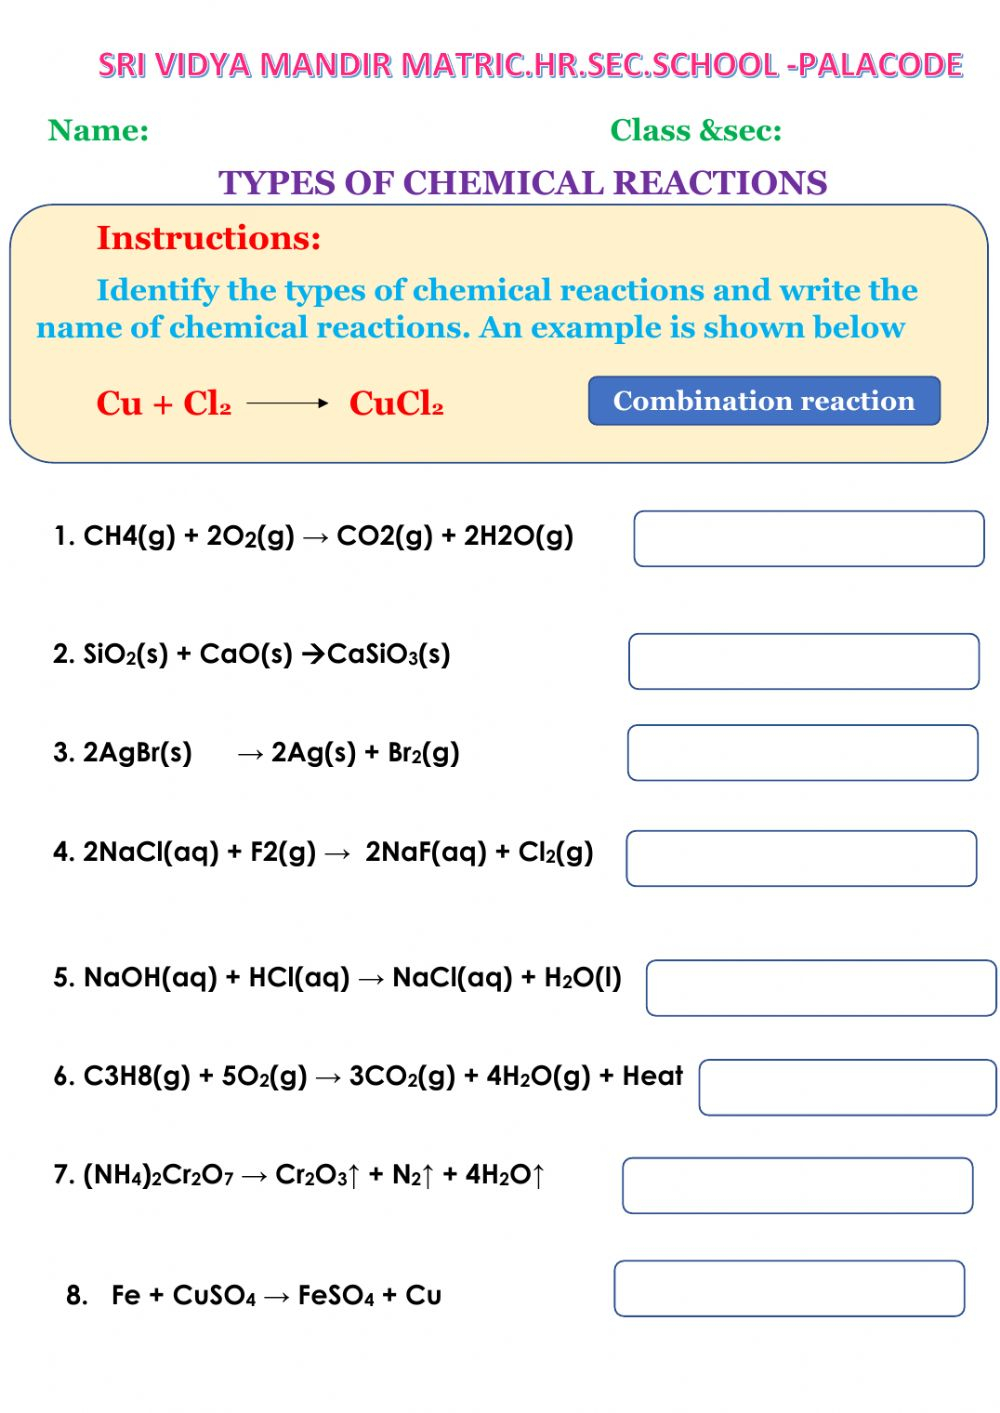 identify-types-of-chemical-reactions-saferbrowser-yahoo-image-search-chemistryworksheet